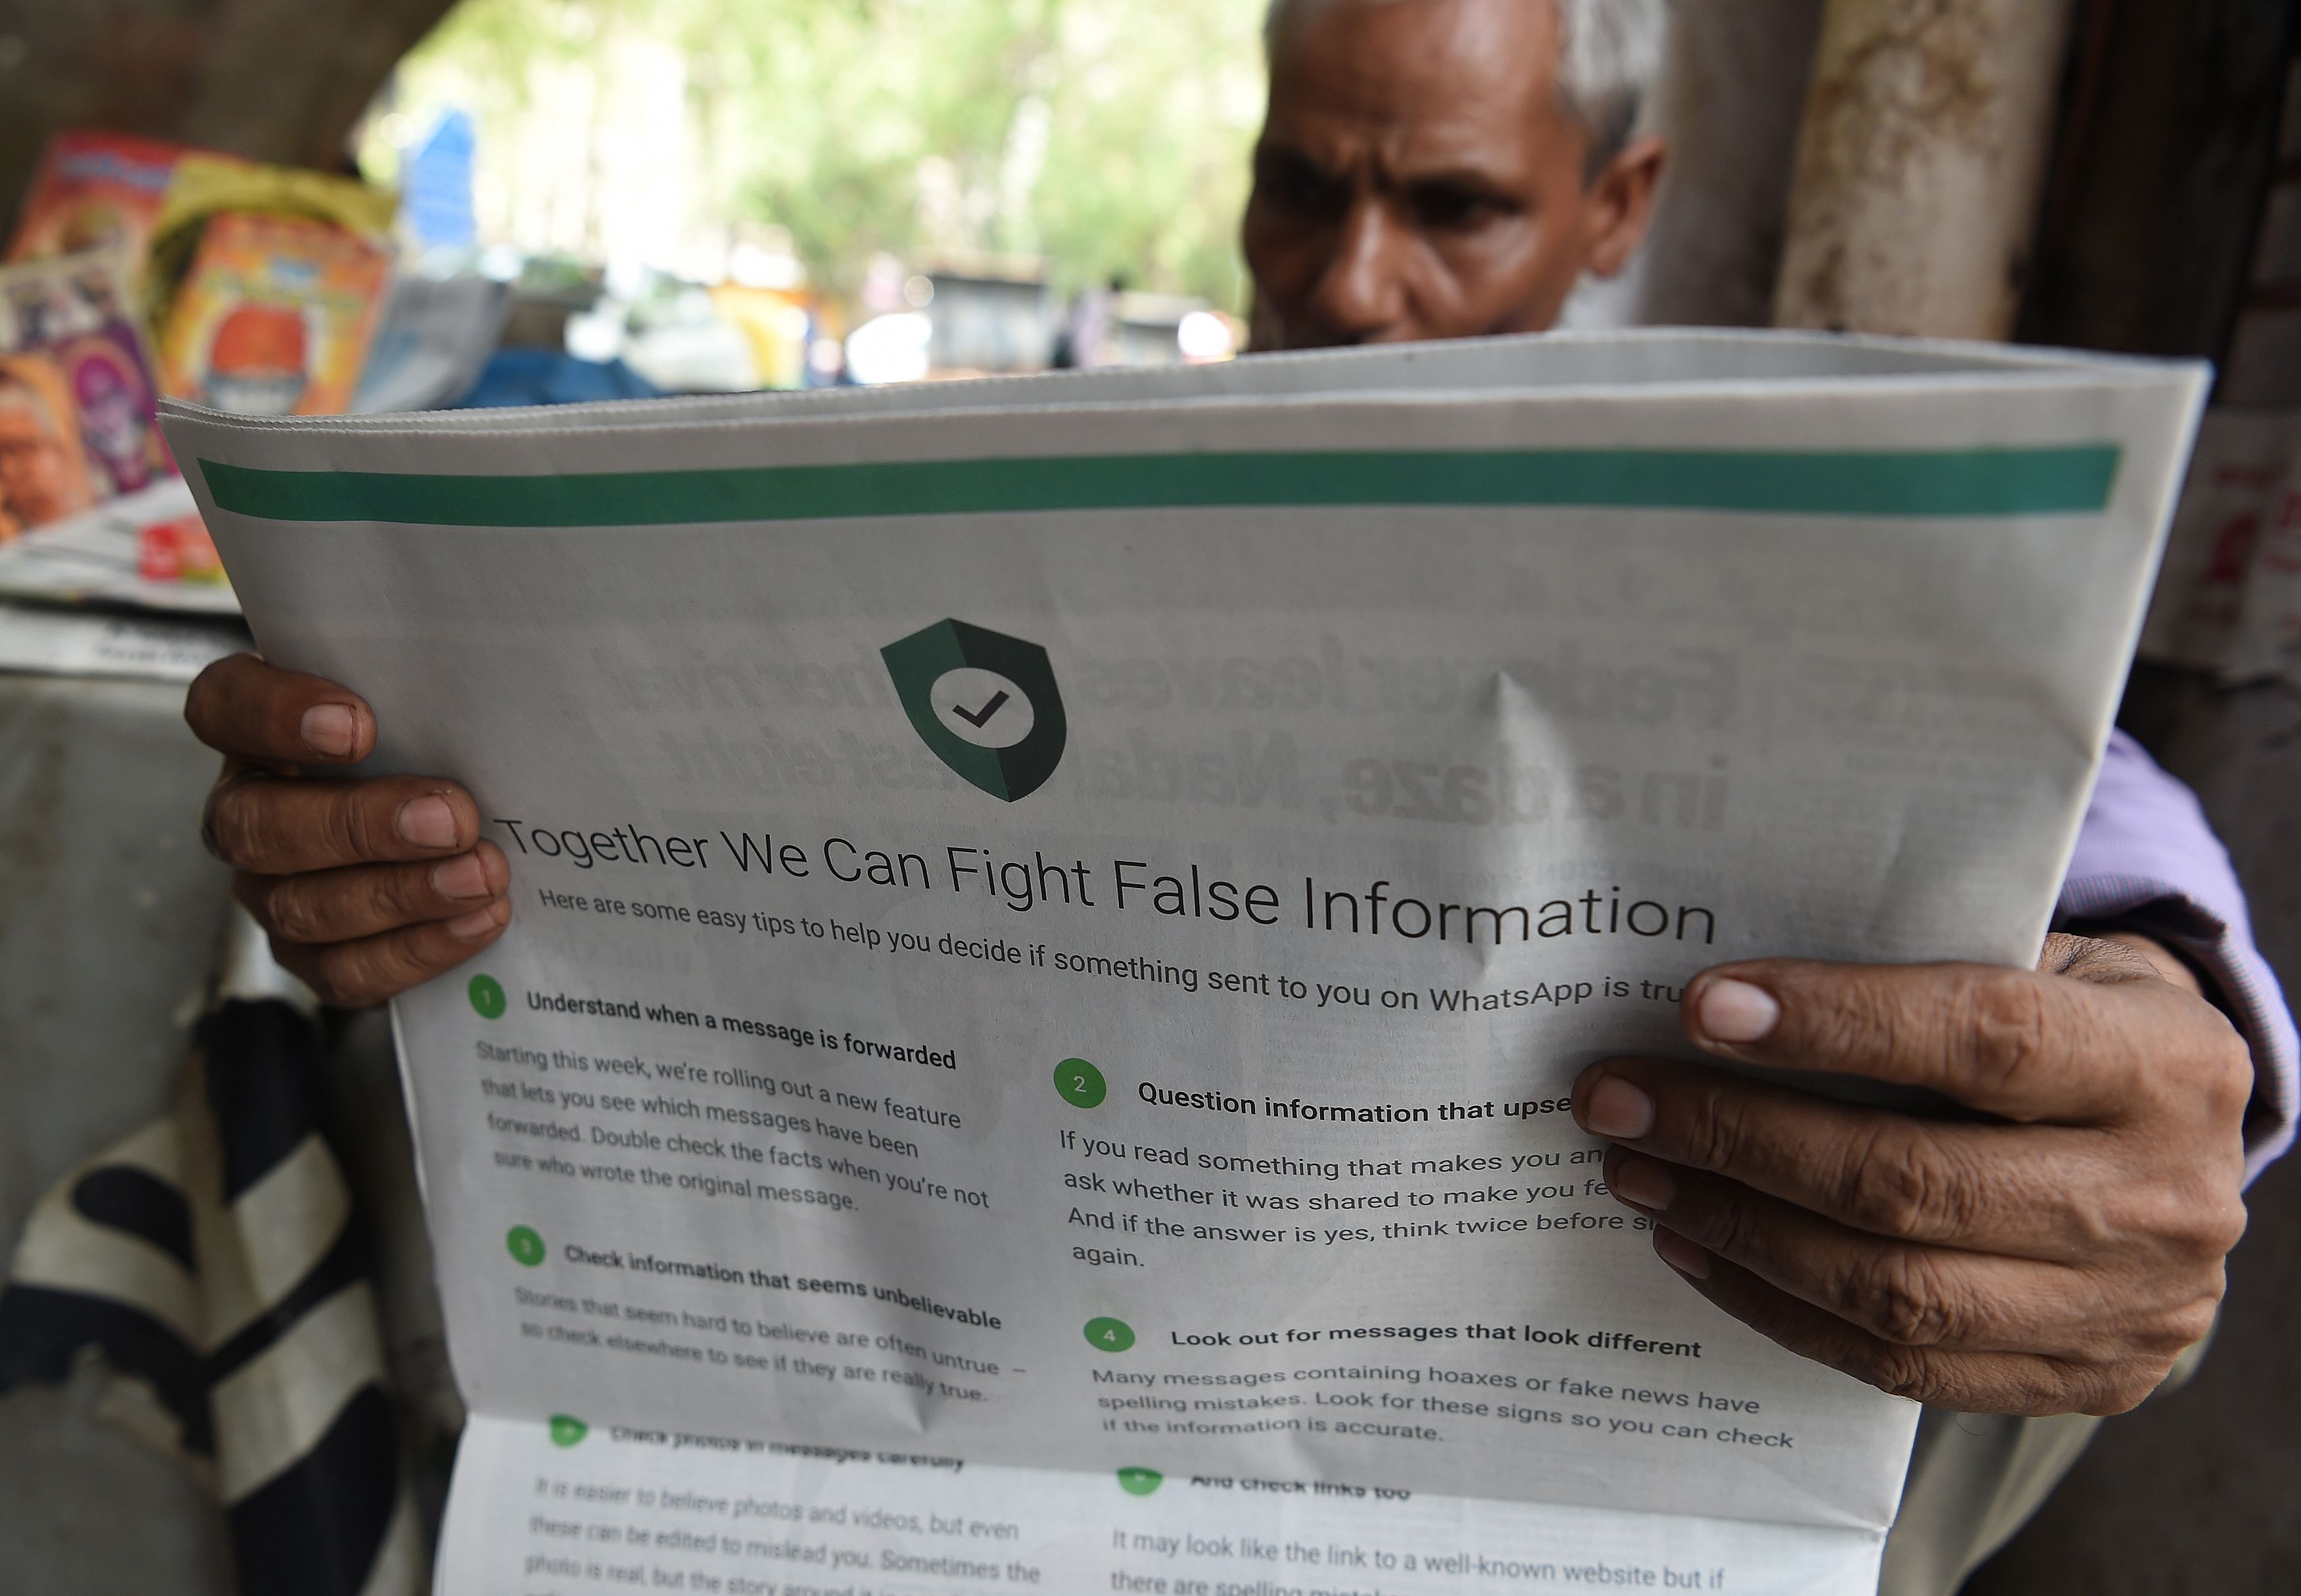 An Indian newspaper vendor reading a newspaper with a full back page advertisement from WhatsApp intended to counter fake information, in New Delhi on July 10, 2018. (Prakash Singh – AFP/Getty Images)